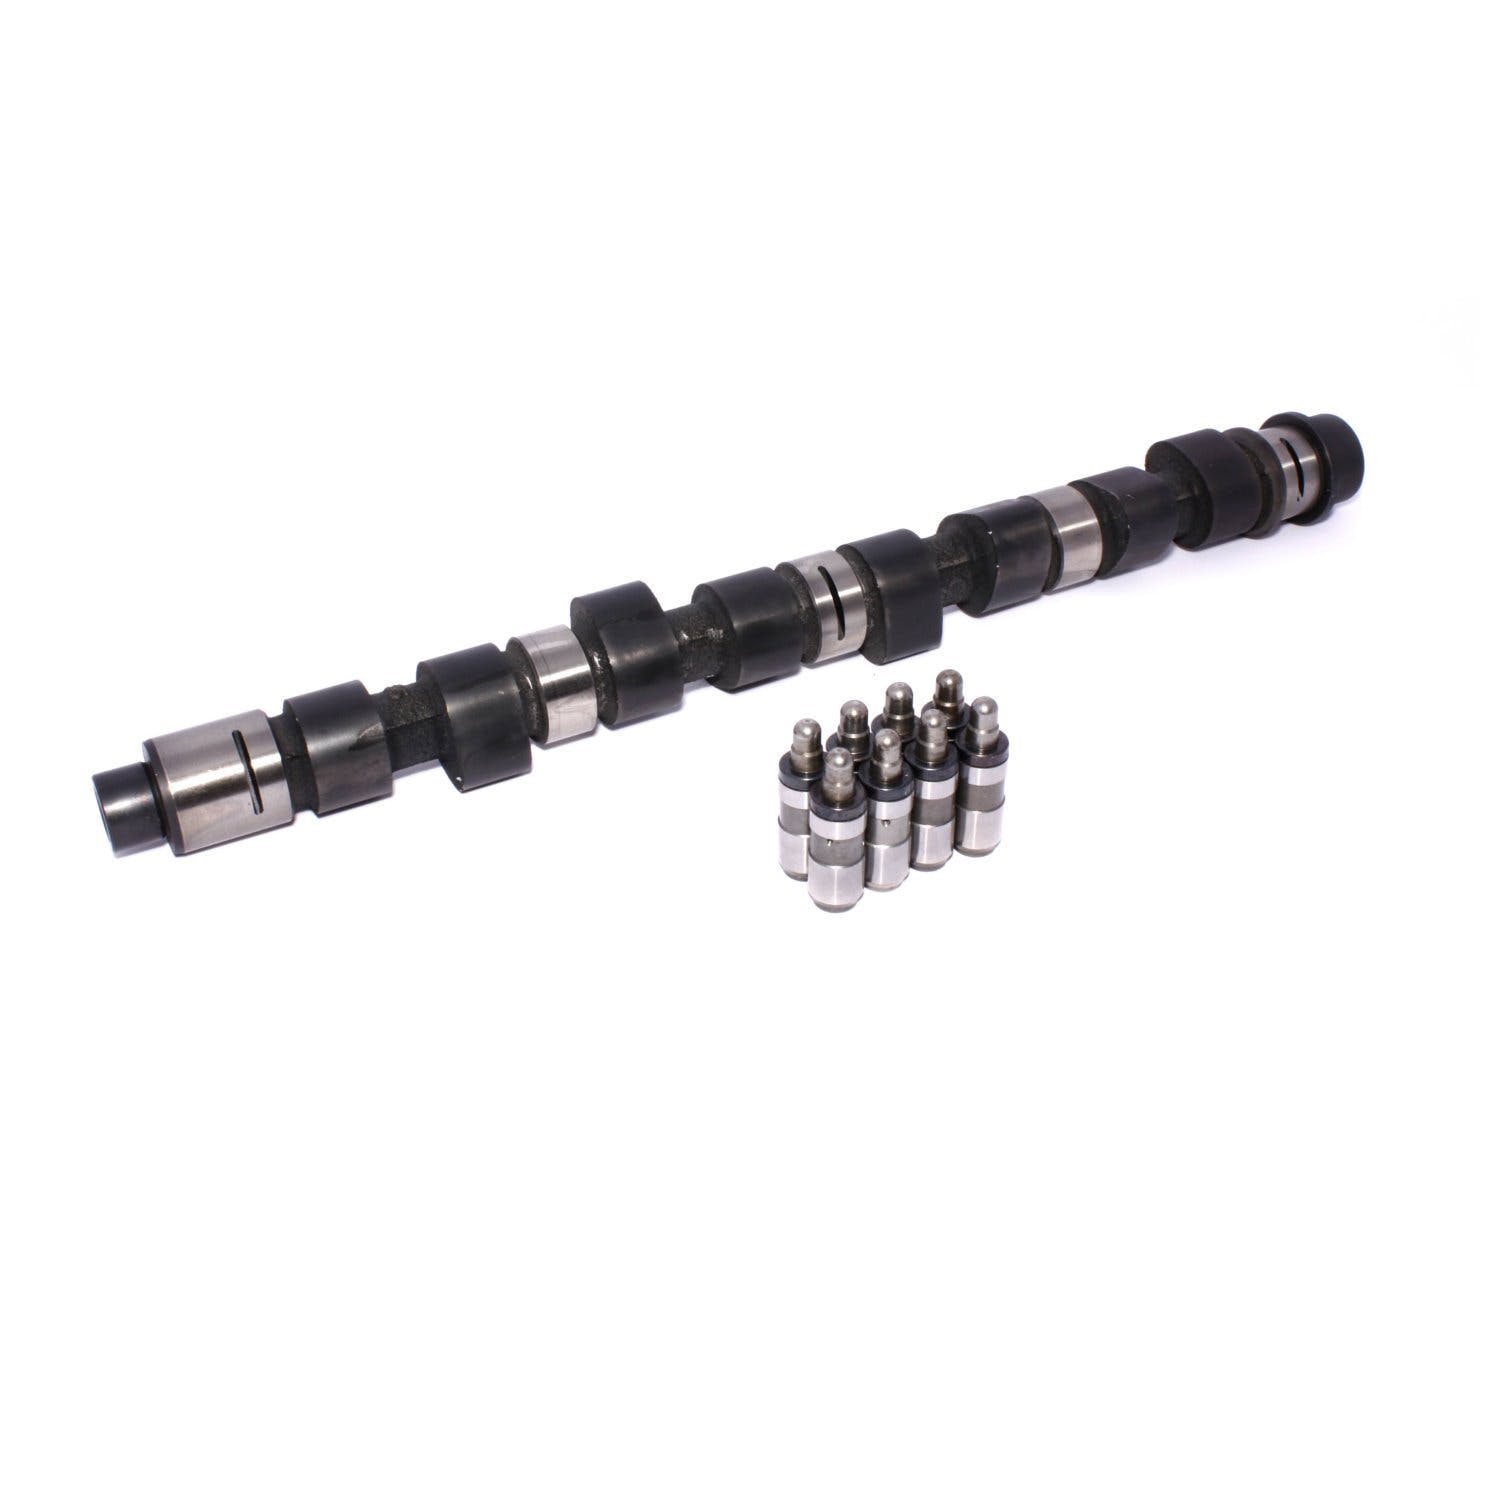 Competition Cams CL22-127-6 High Energy Camshaft/Lifter Kit